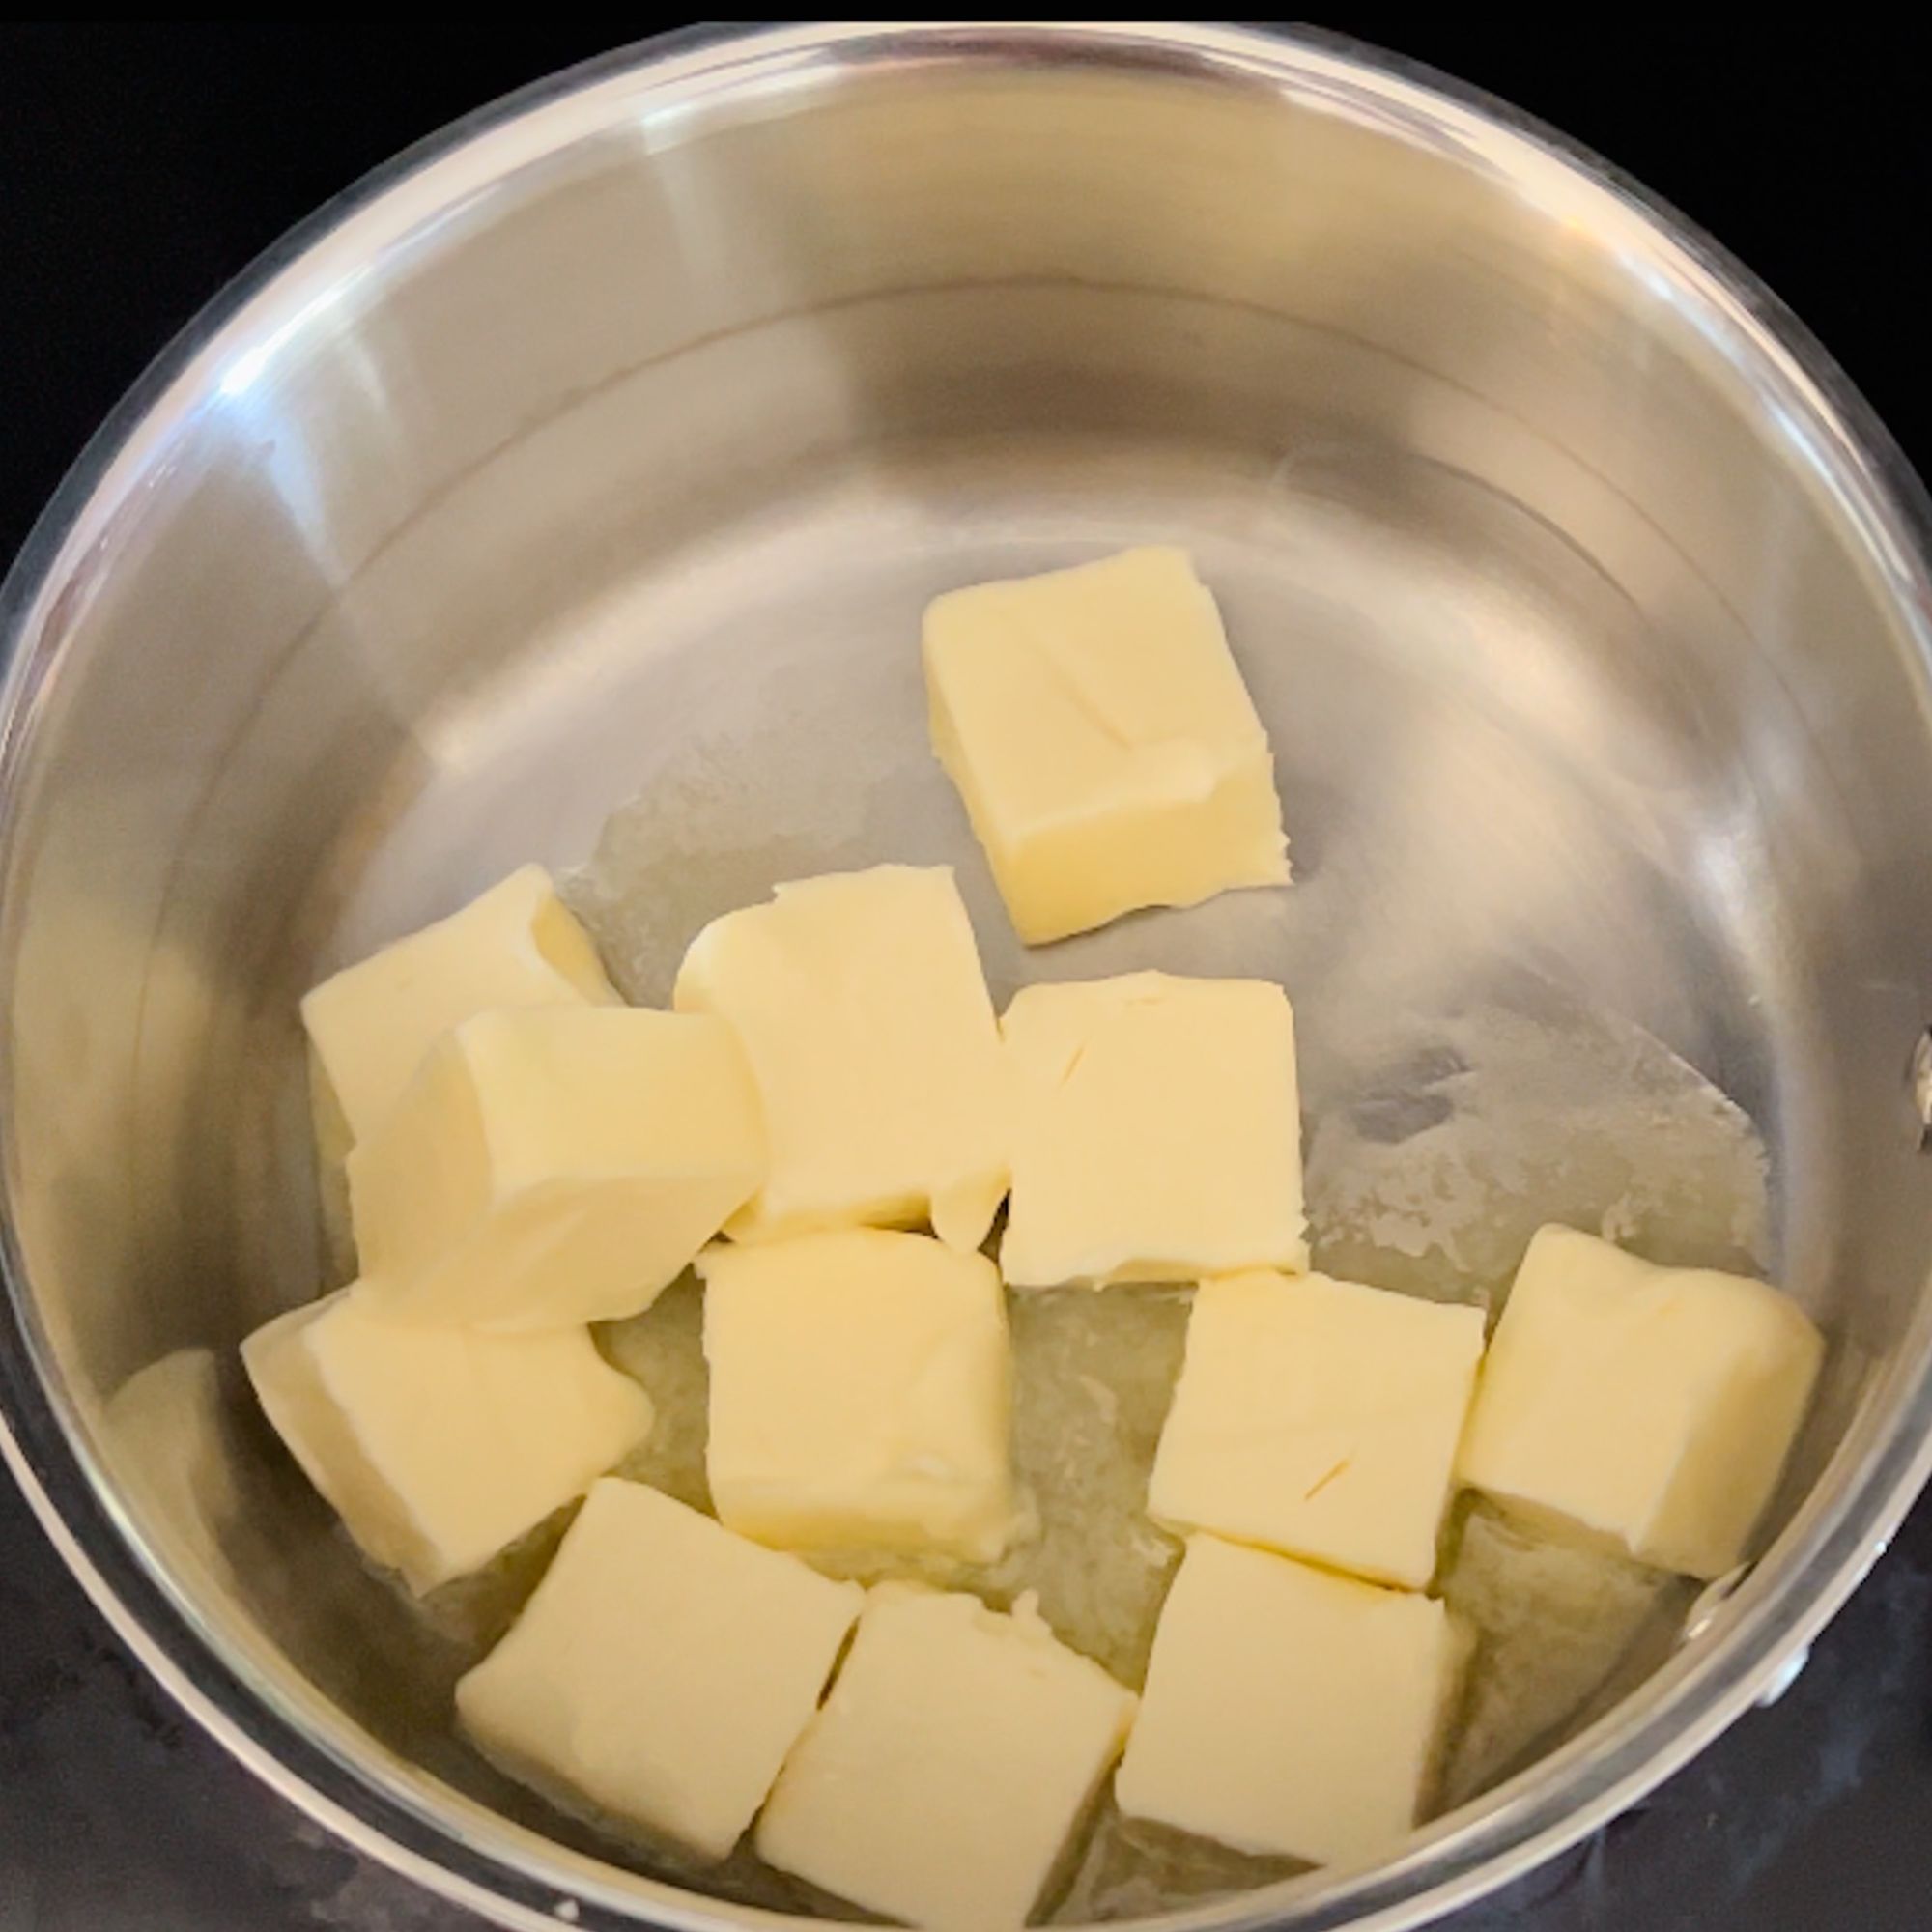 Butter cubed in a sauce pan preparing to become browned butter.